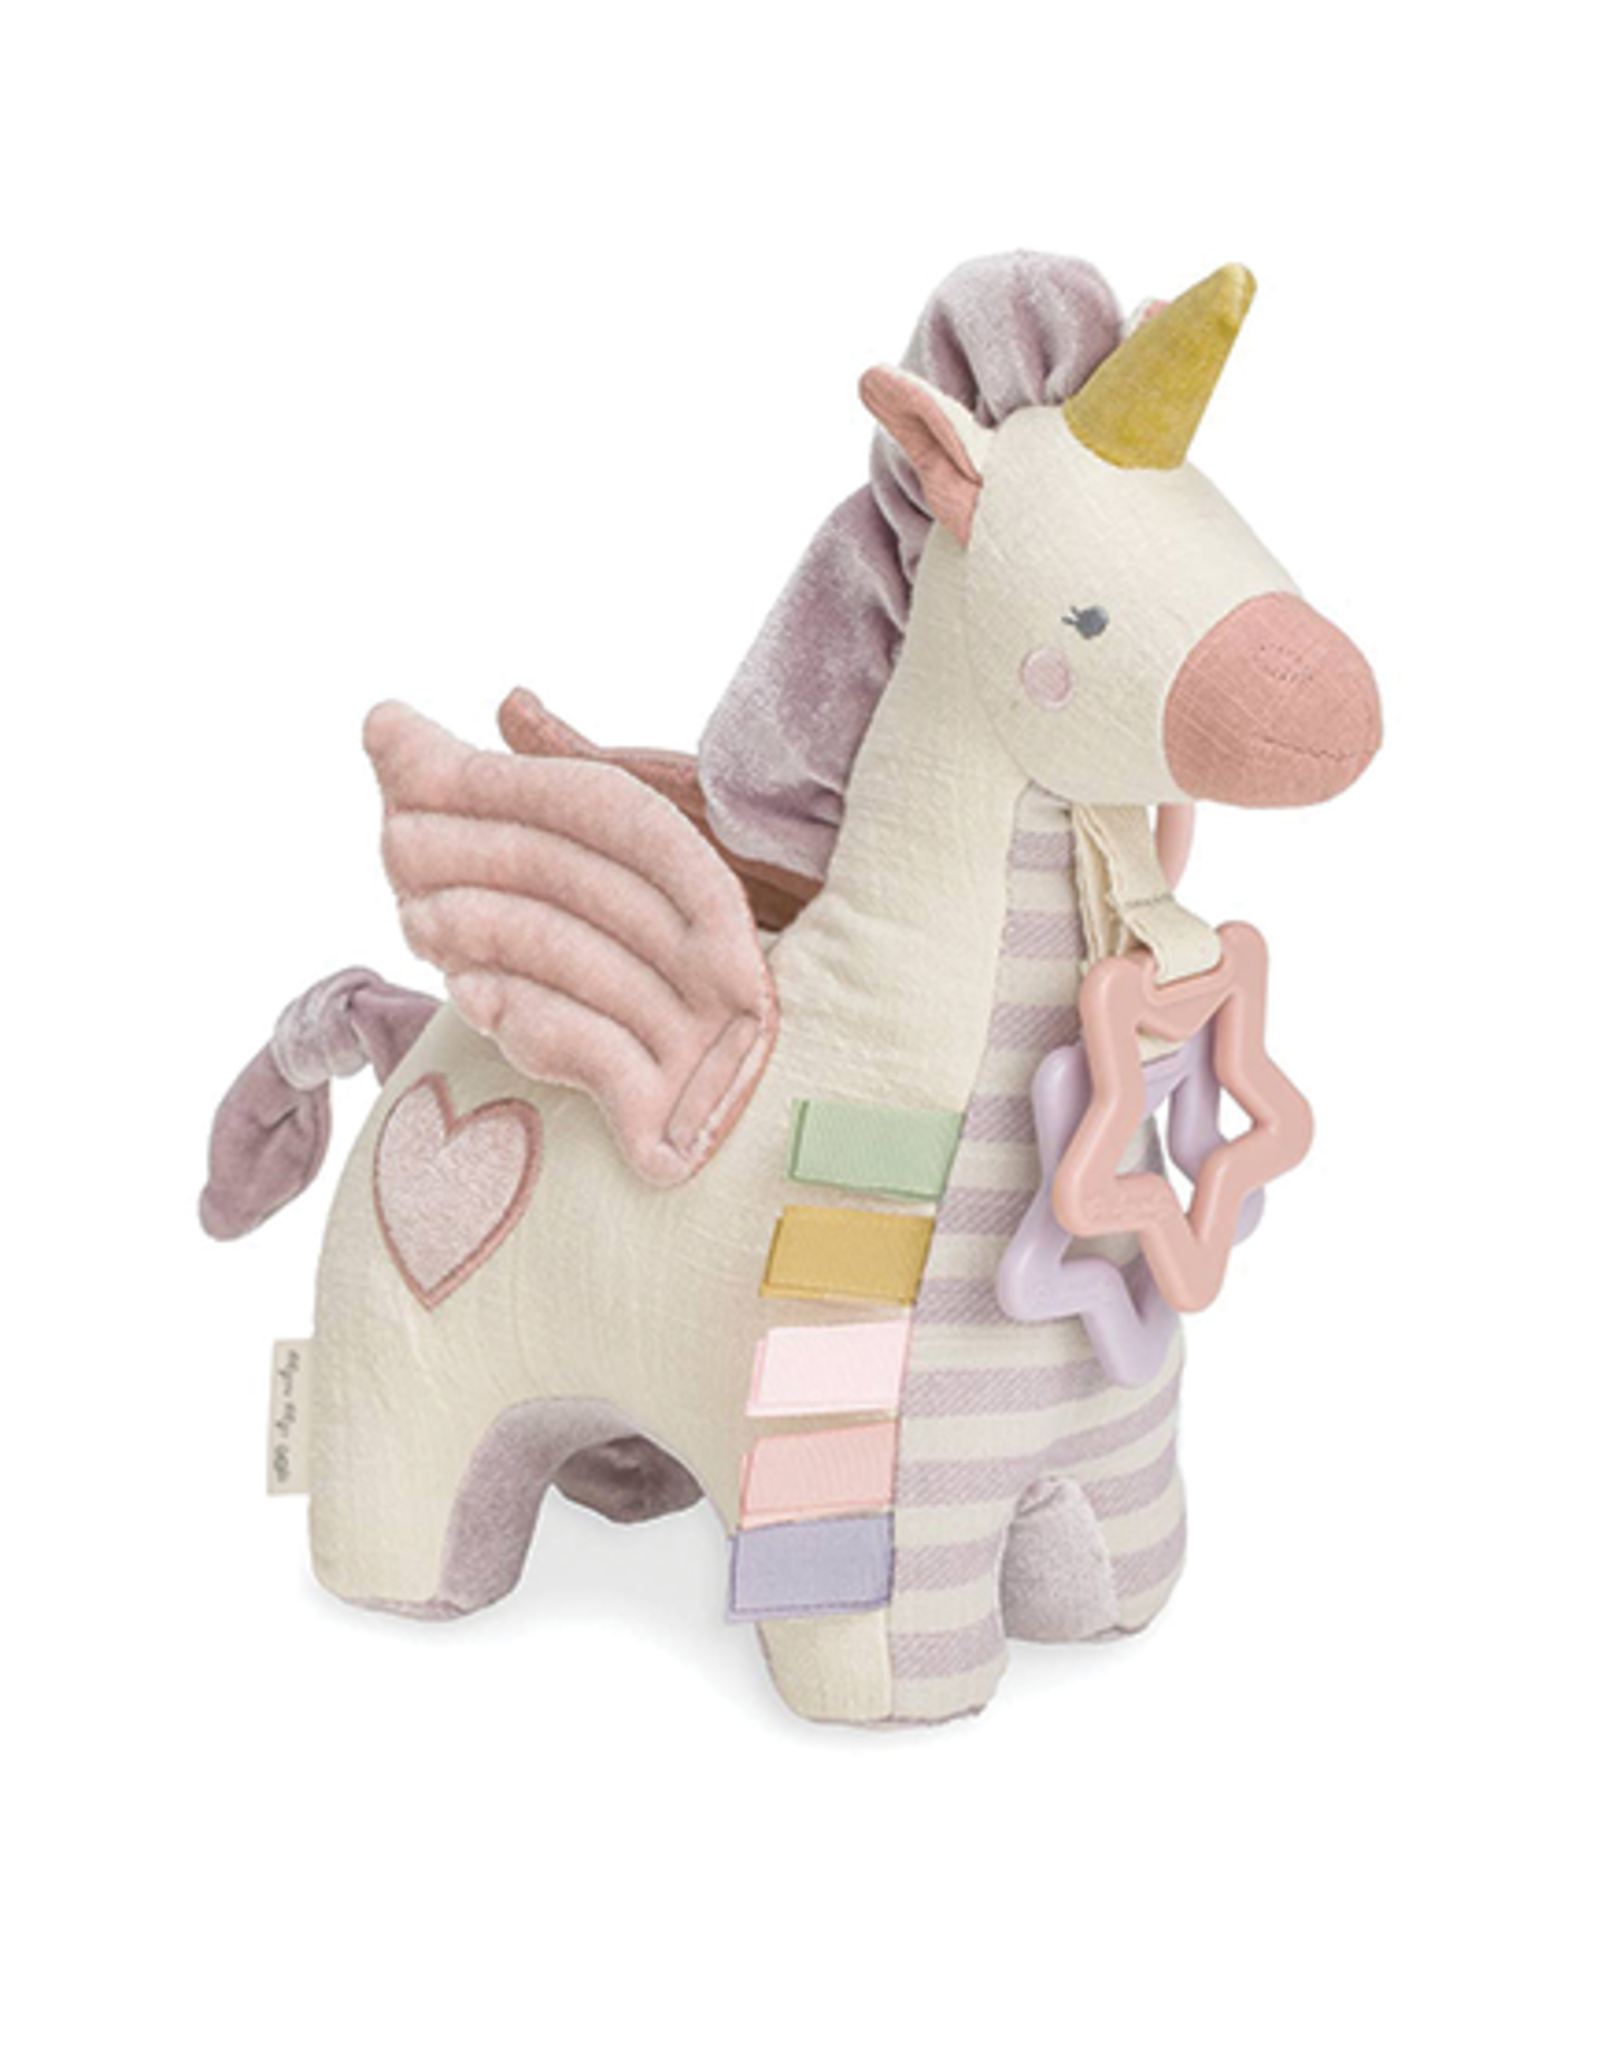 Itzy Ritzy Pegasus Activity Plush with Teether